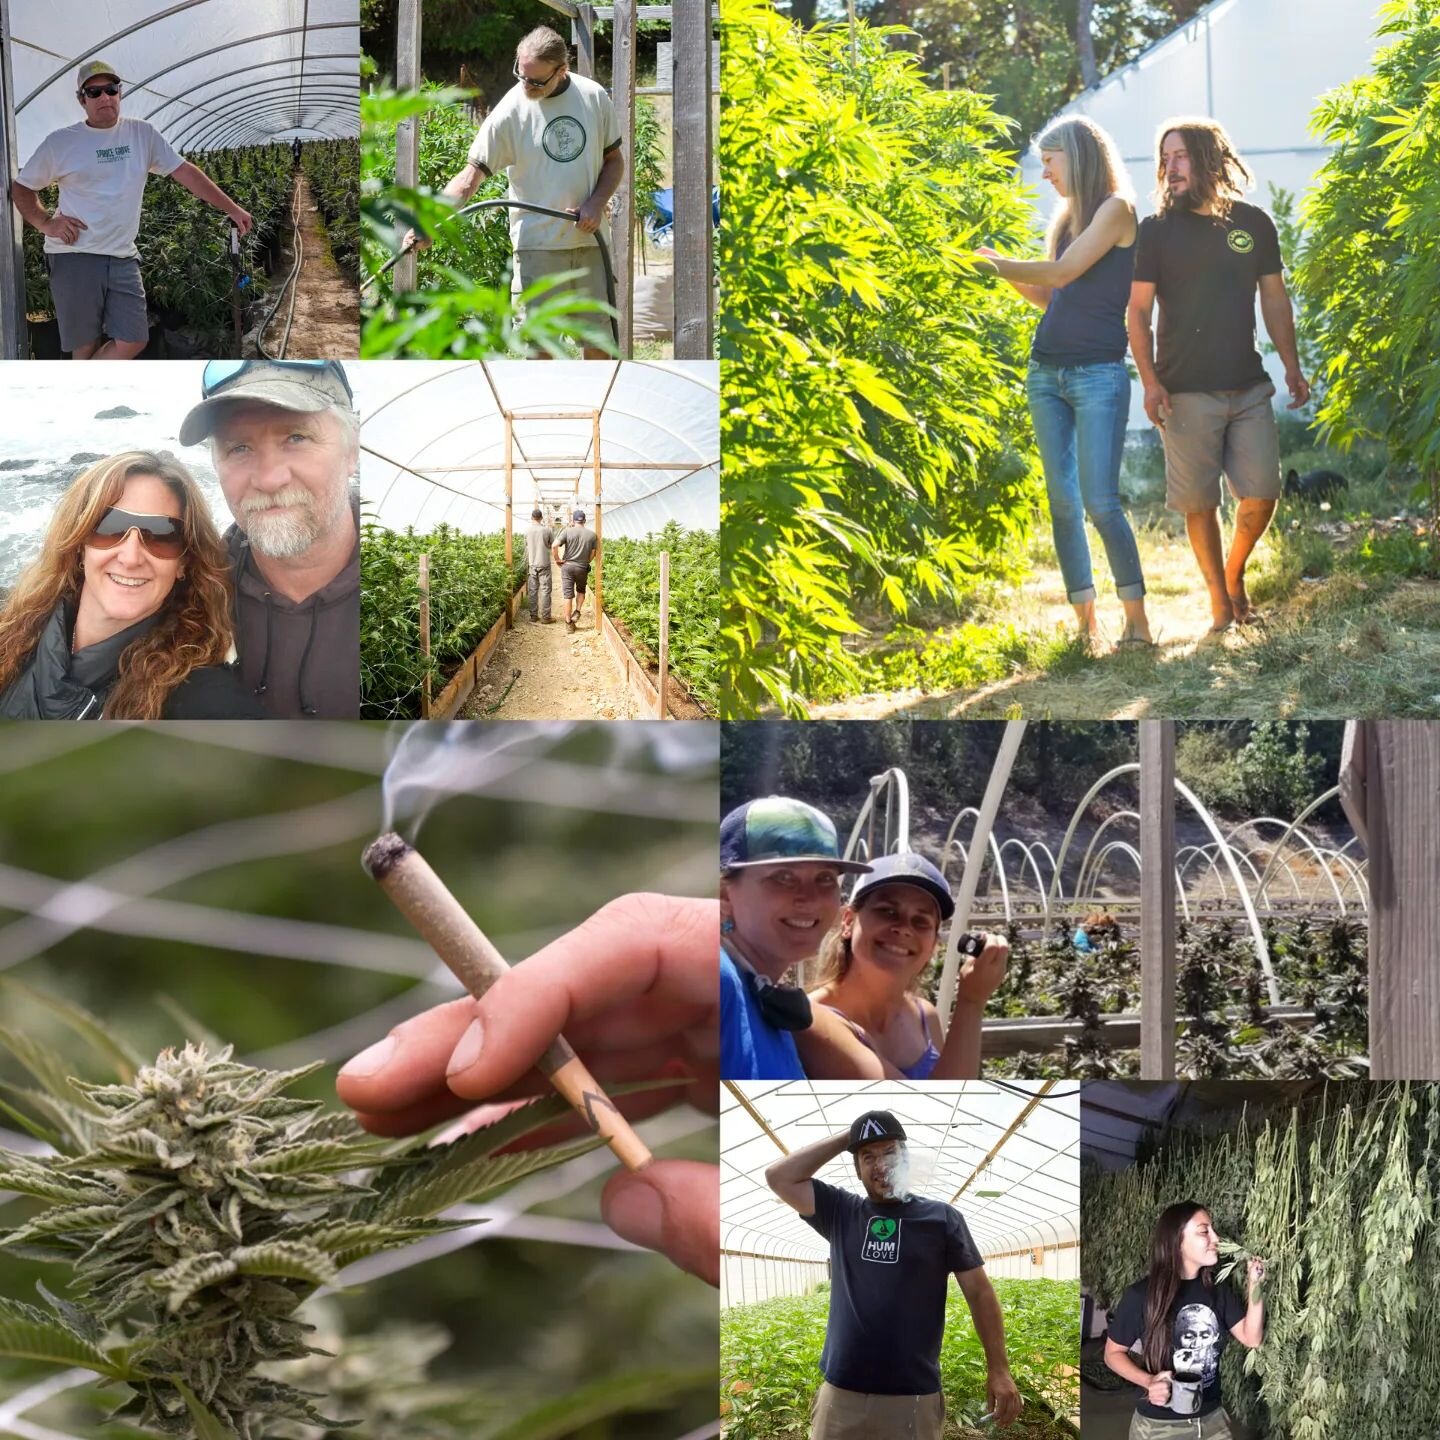 Happy Danksgiving! Thankful for our farmers, retail partners and Humboldt flower lovers! Wishing everyone a day filled with good vibes and great herb! 🍃

@greenoxinc @bokifarms @king_range_farms @sprucegrovefarmsllc @canyon_farms @southernhumboldtgr